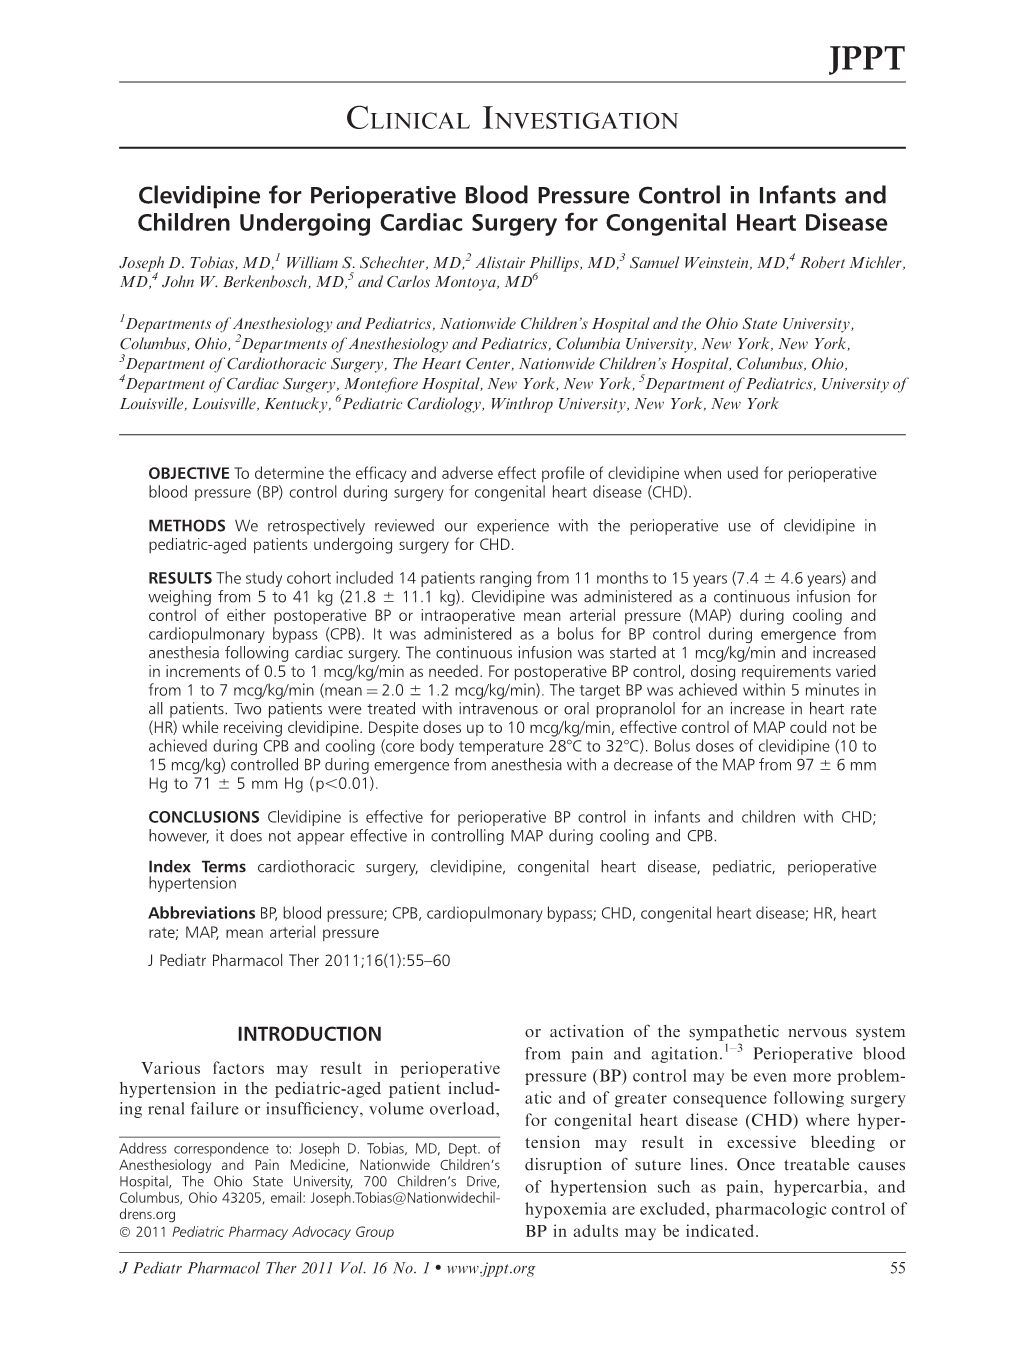 Clevidipine for Perioperative Blood Pressure Control in Infants and Children Undergoing Cardiac Surgery for Congenital Heart Disease